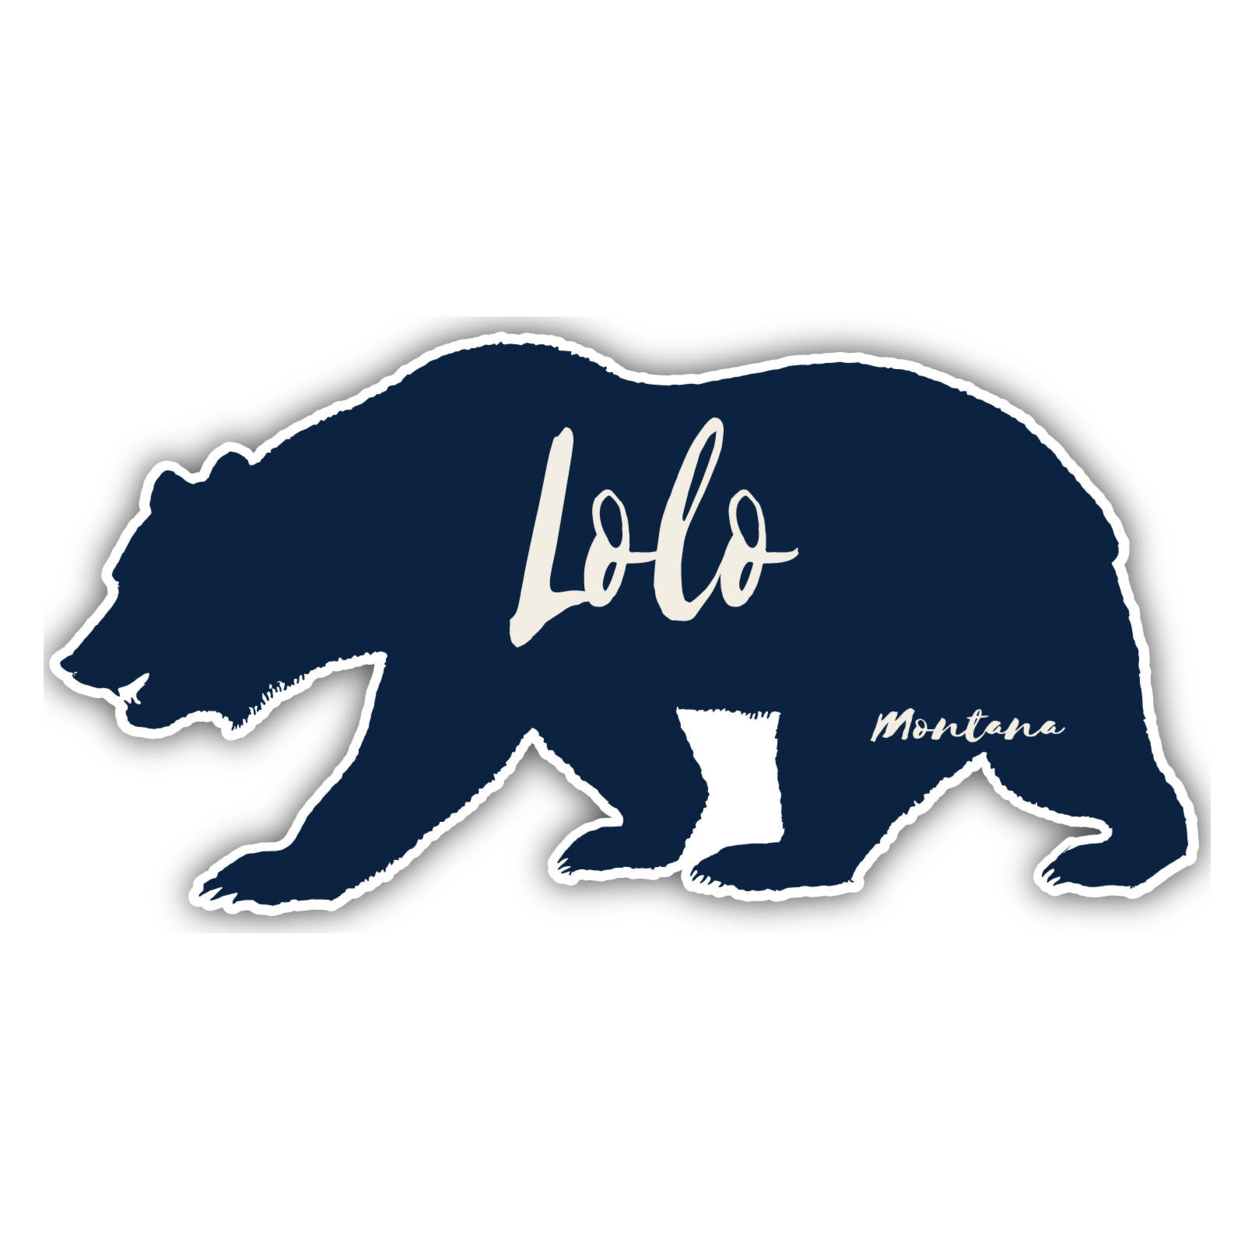 Lolo Montana Souvenir Decorative Stickers (Choose Theme And Size) - 2-Inch, Adventures Awaits